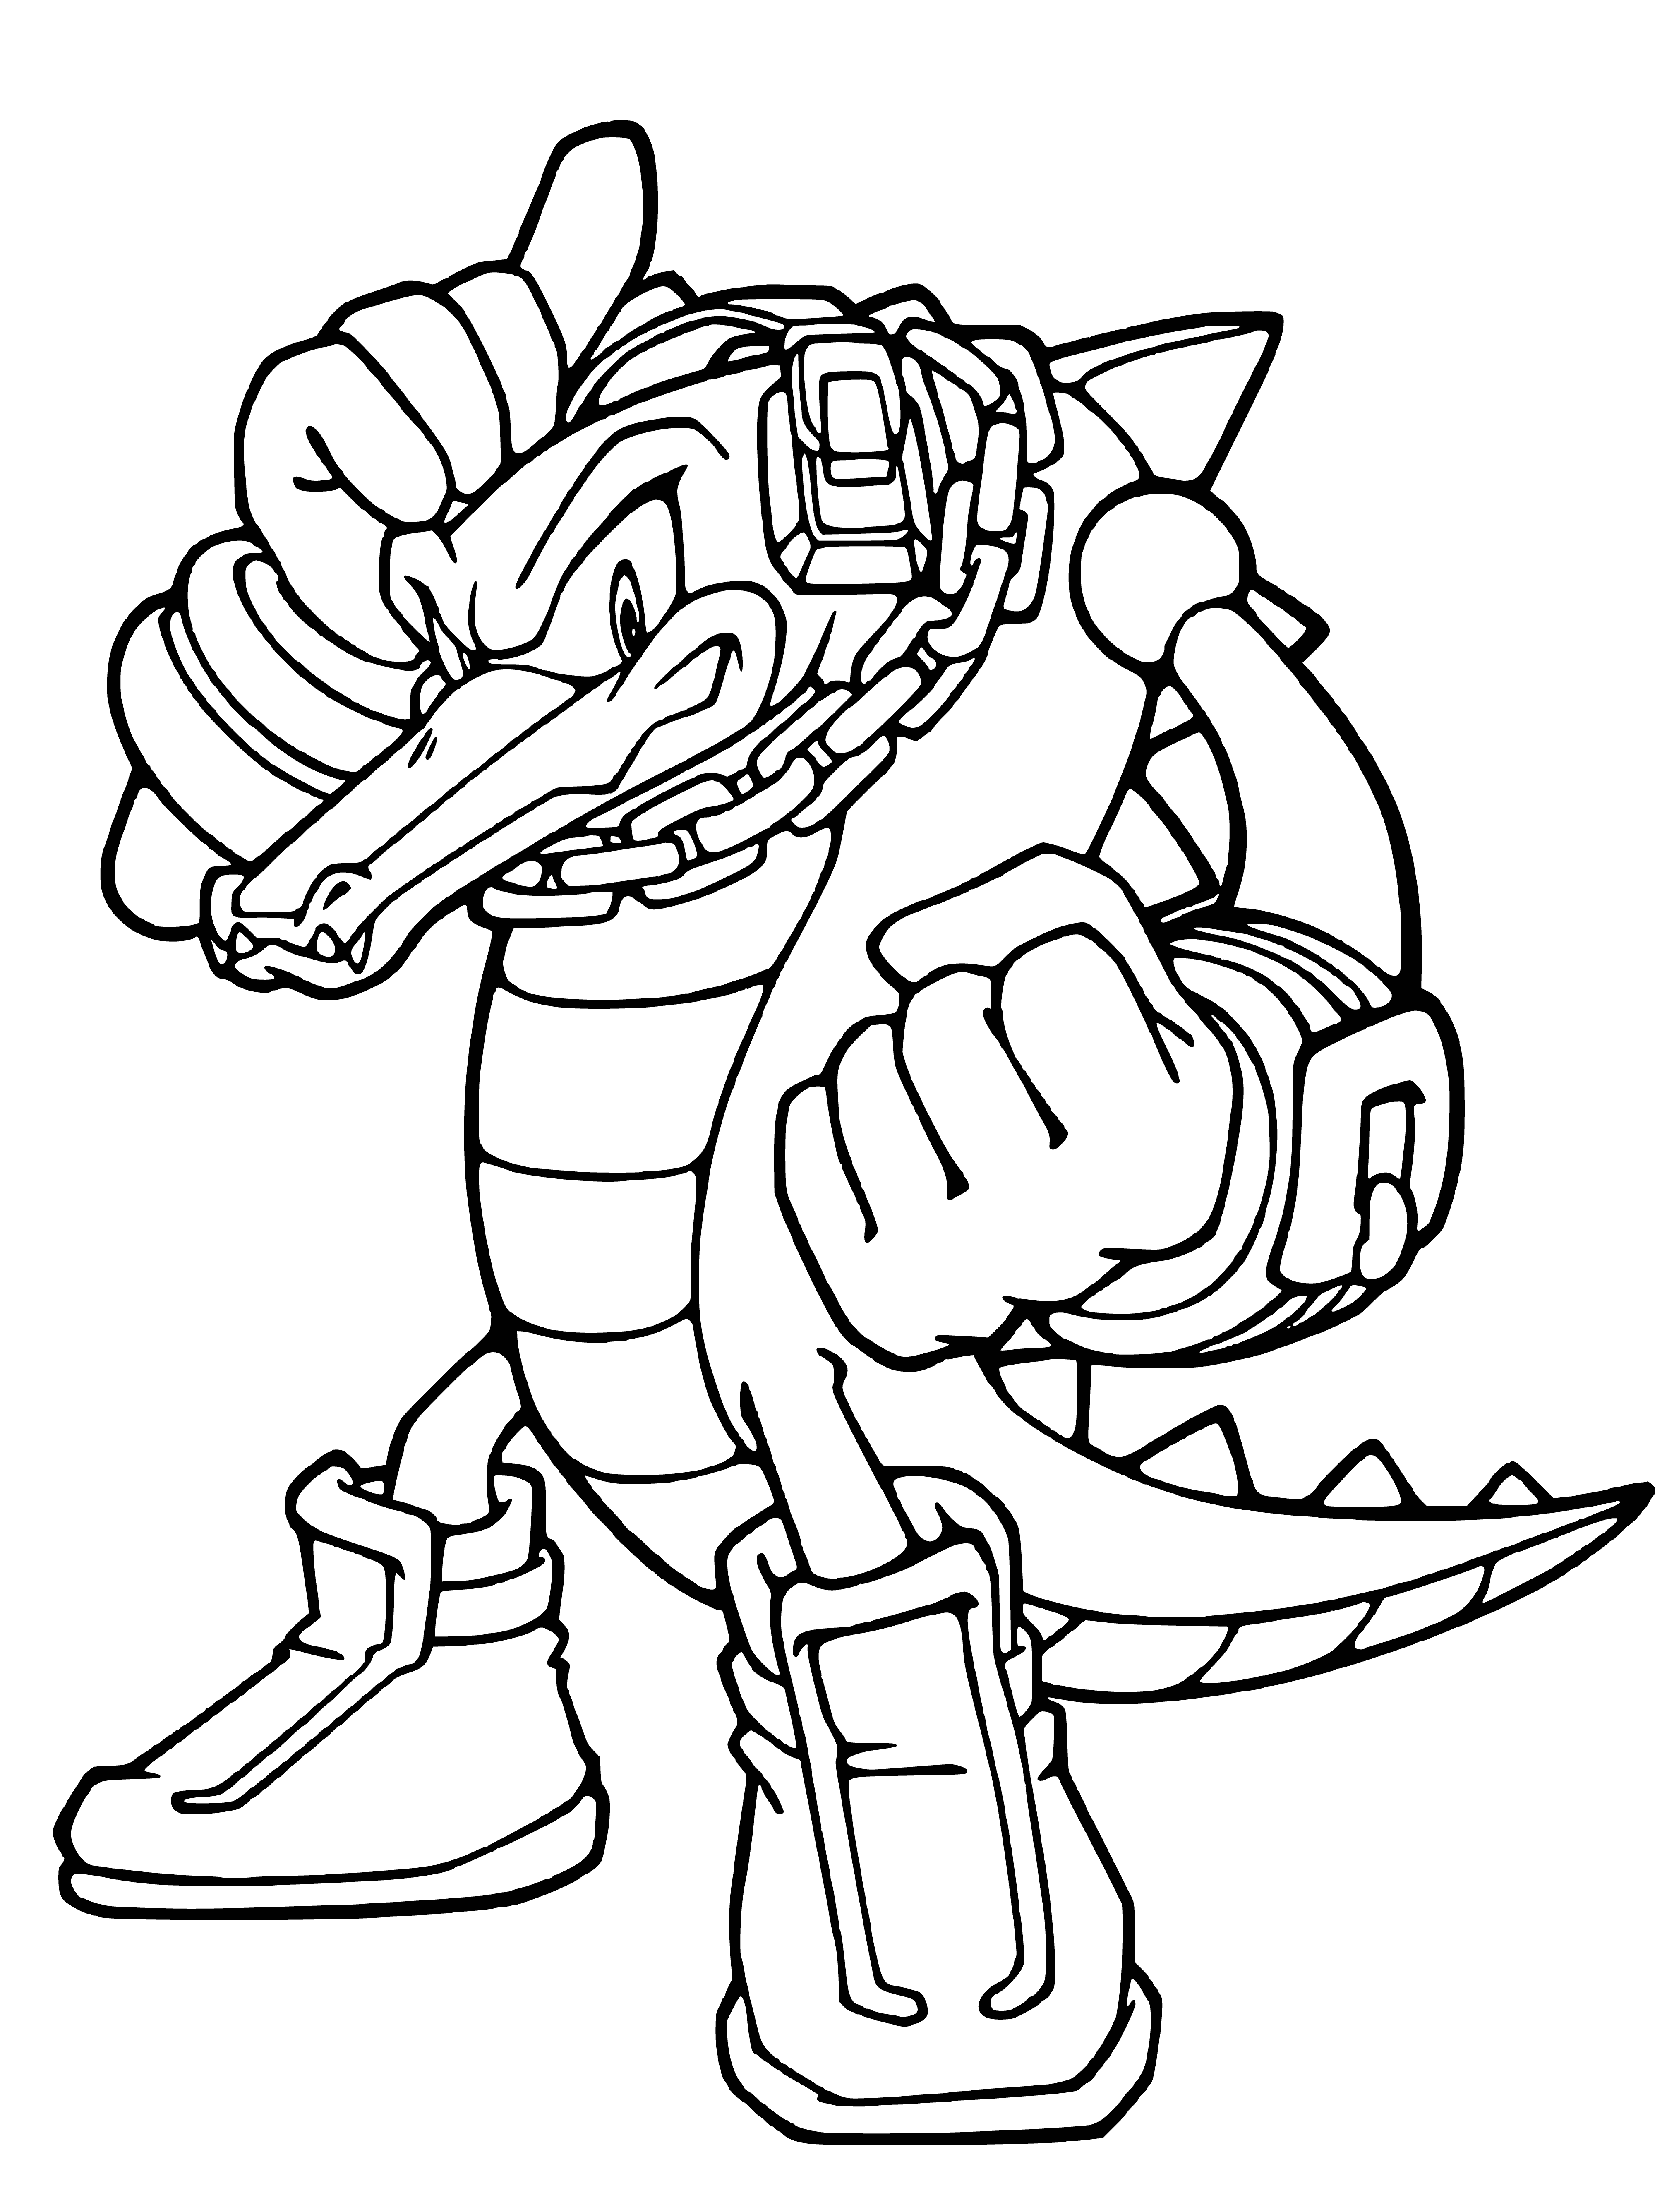 coloring page: Vector, a blue hedgehog w/ red shoes, stands on a green hill w/ yellow flowers; blue sky & white clouds. #SonicX